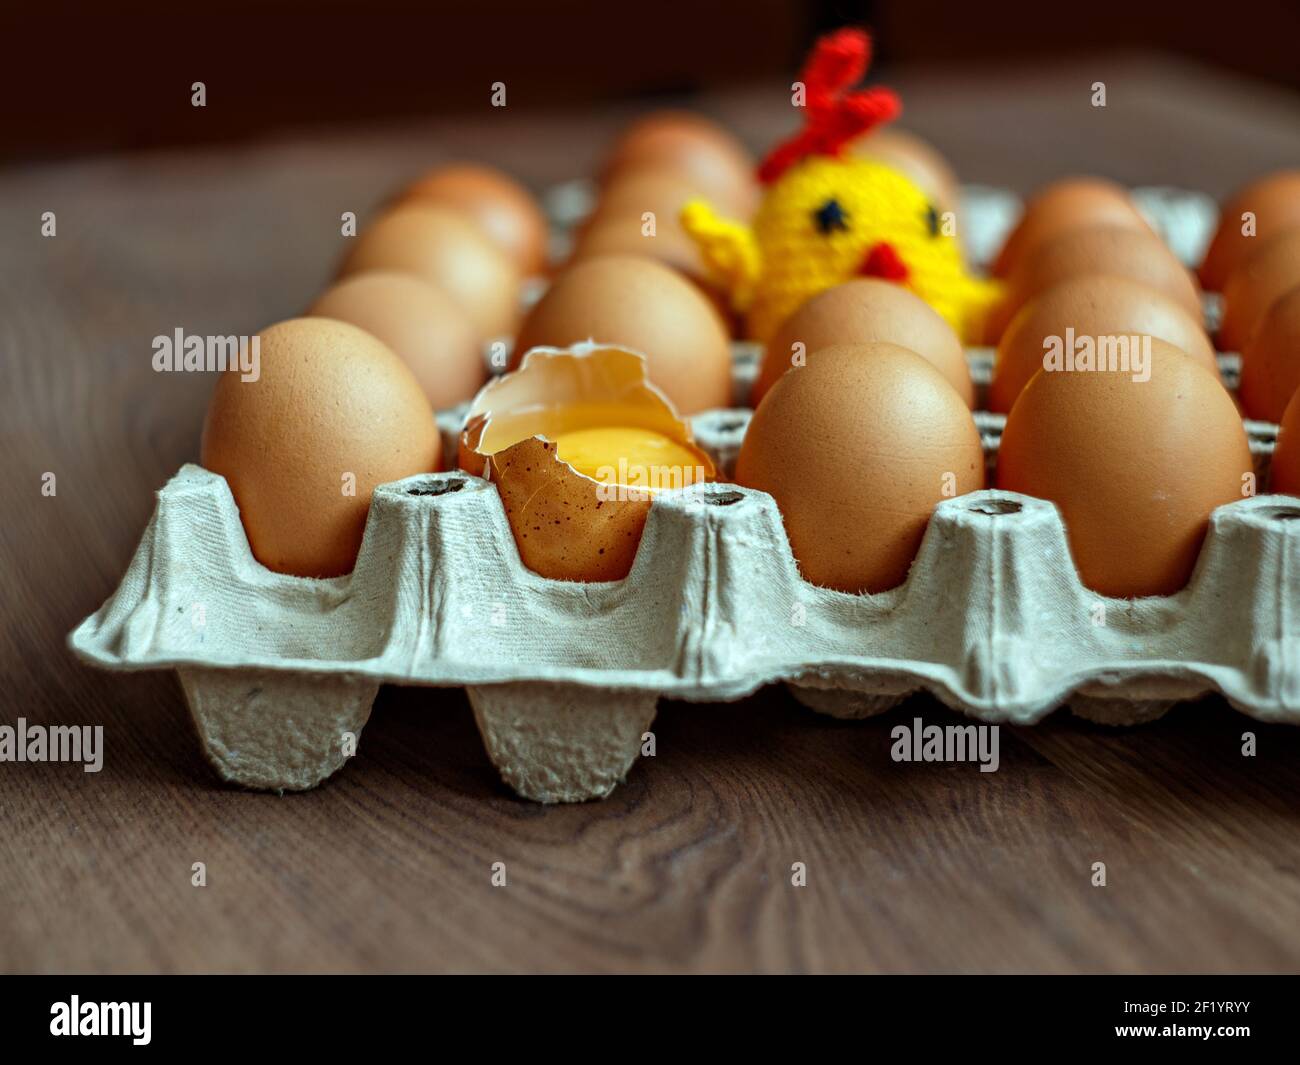 Brown chicken eggs and toy yellow chicken in gray box on table. Selective focus Stock Photo